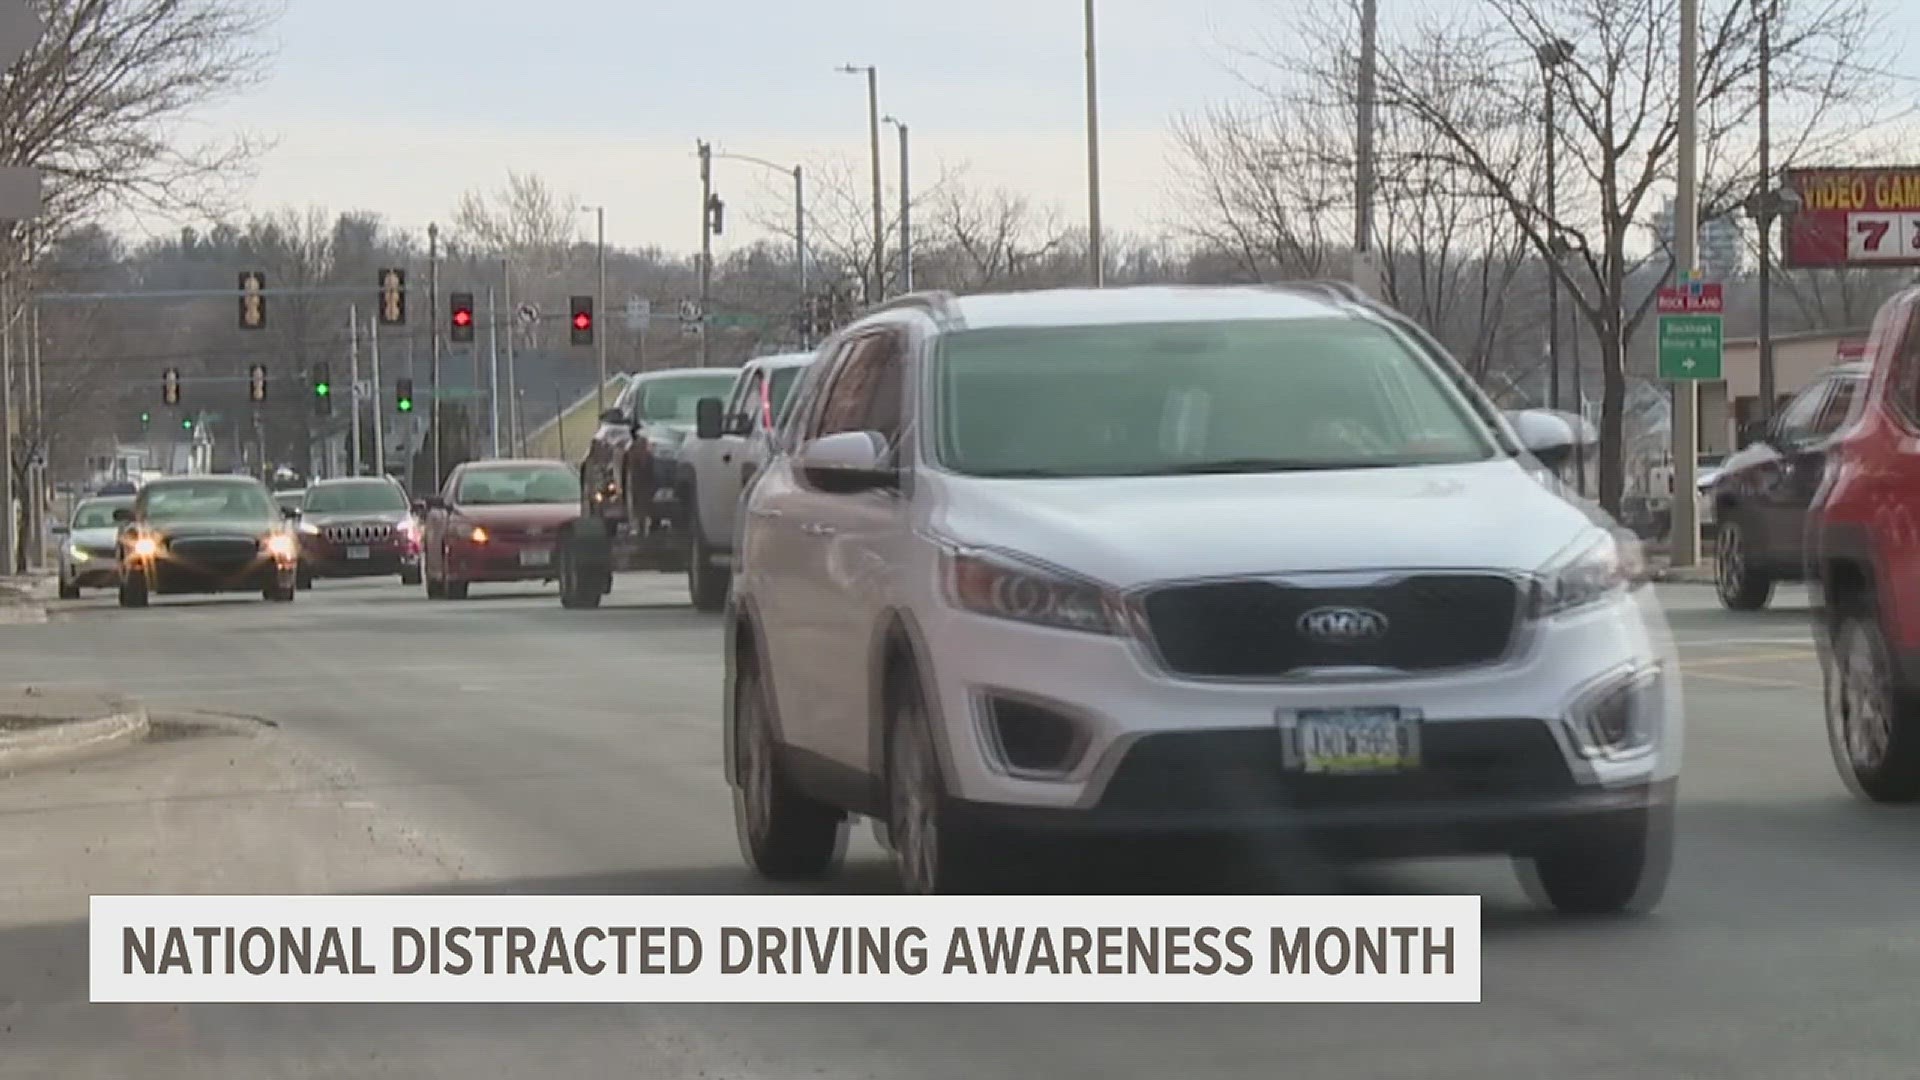 The Iowa State Patrol conducted a poll last year and found more than half of drivers admitted to being on their phones while driving at least some of the time.